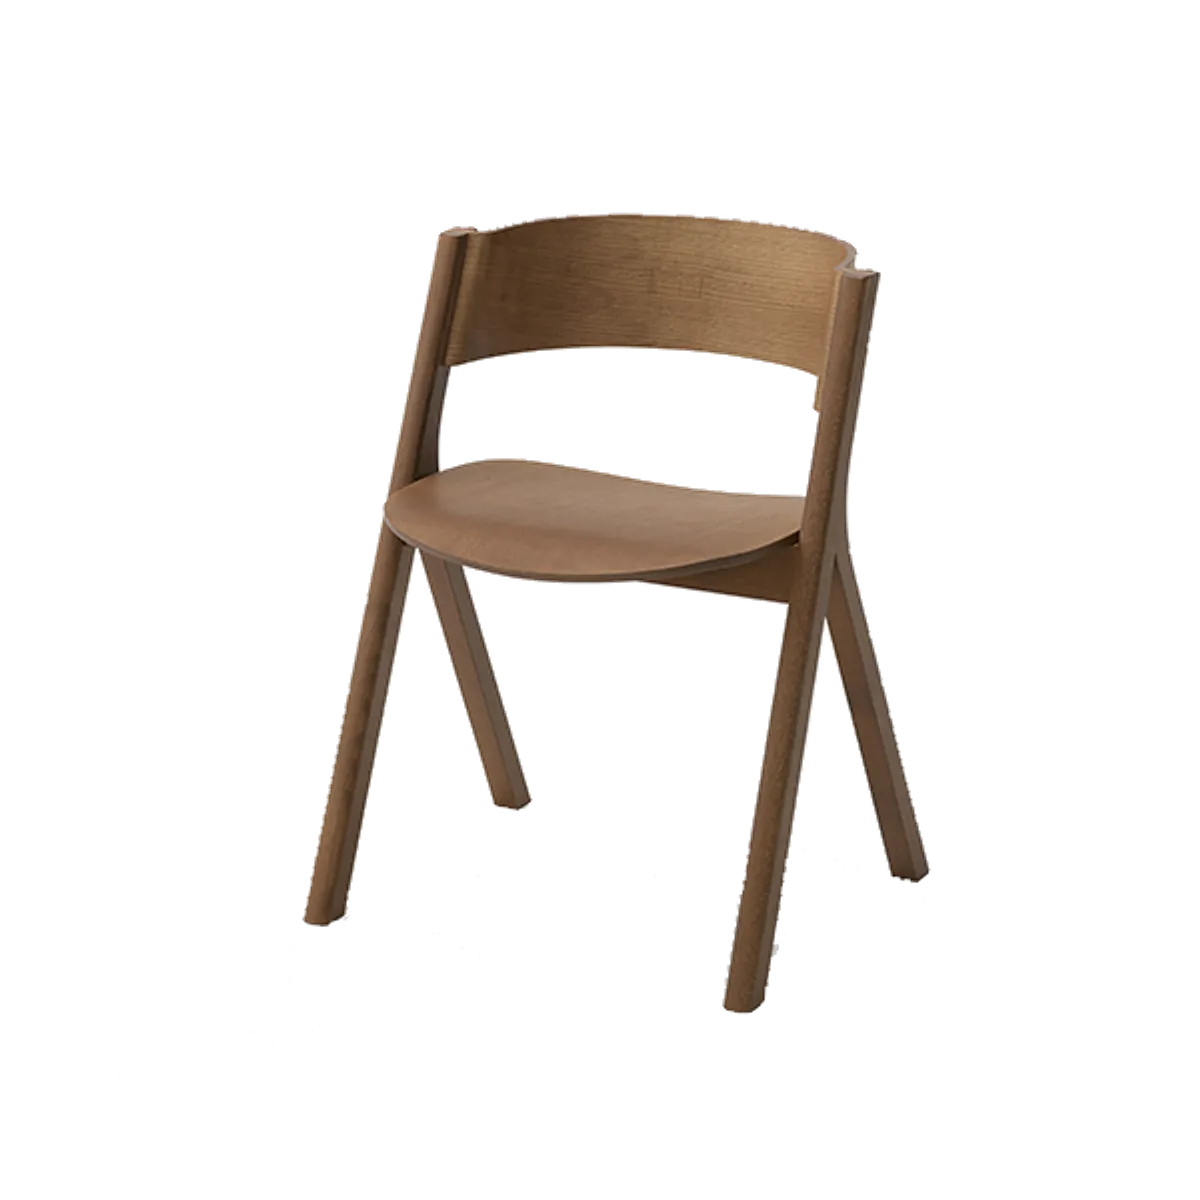 Folly Chair Ash Wood Inside Out Contracts